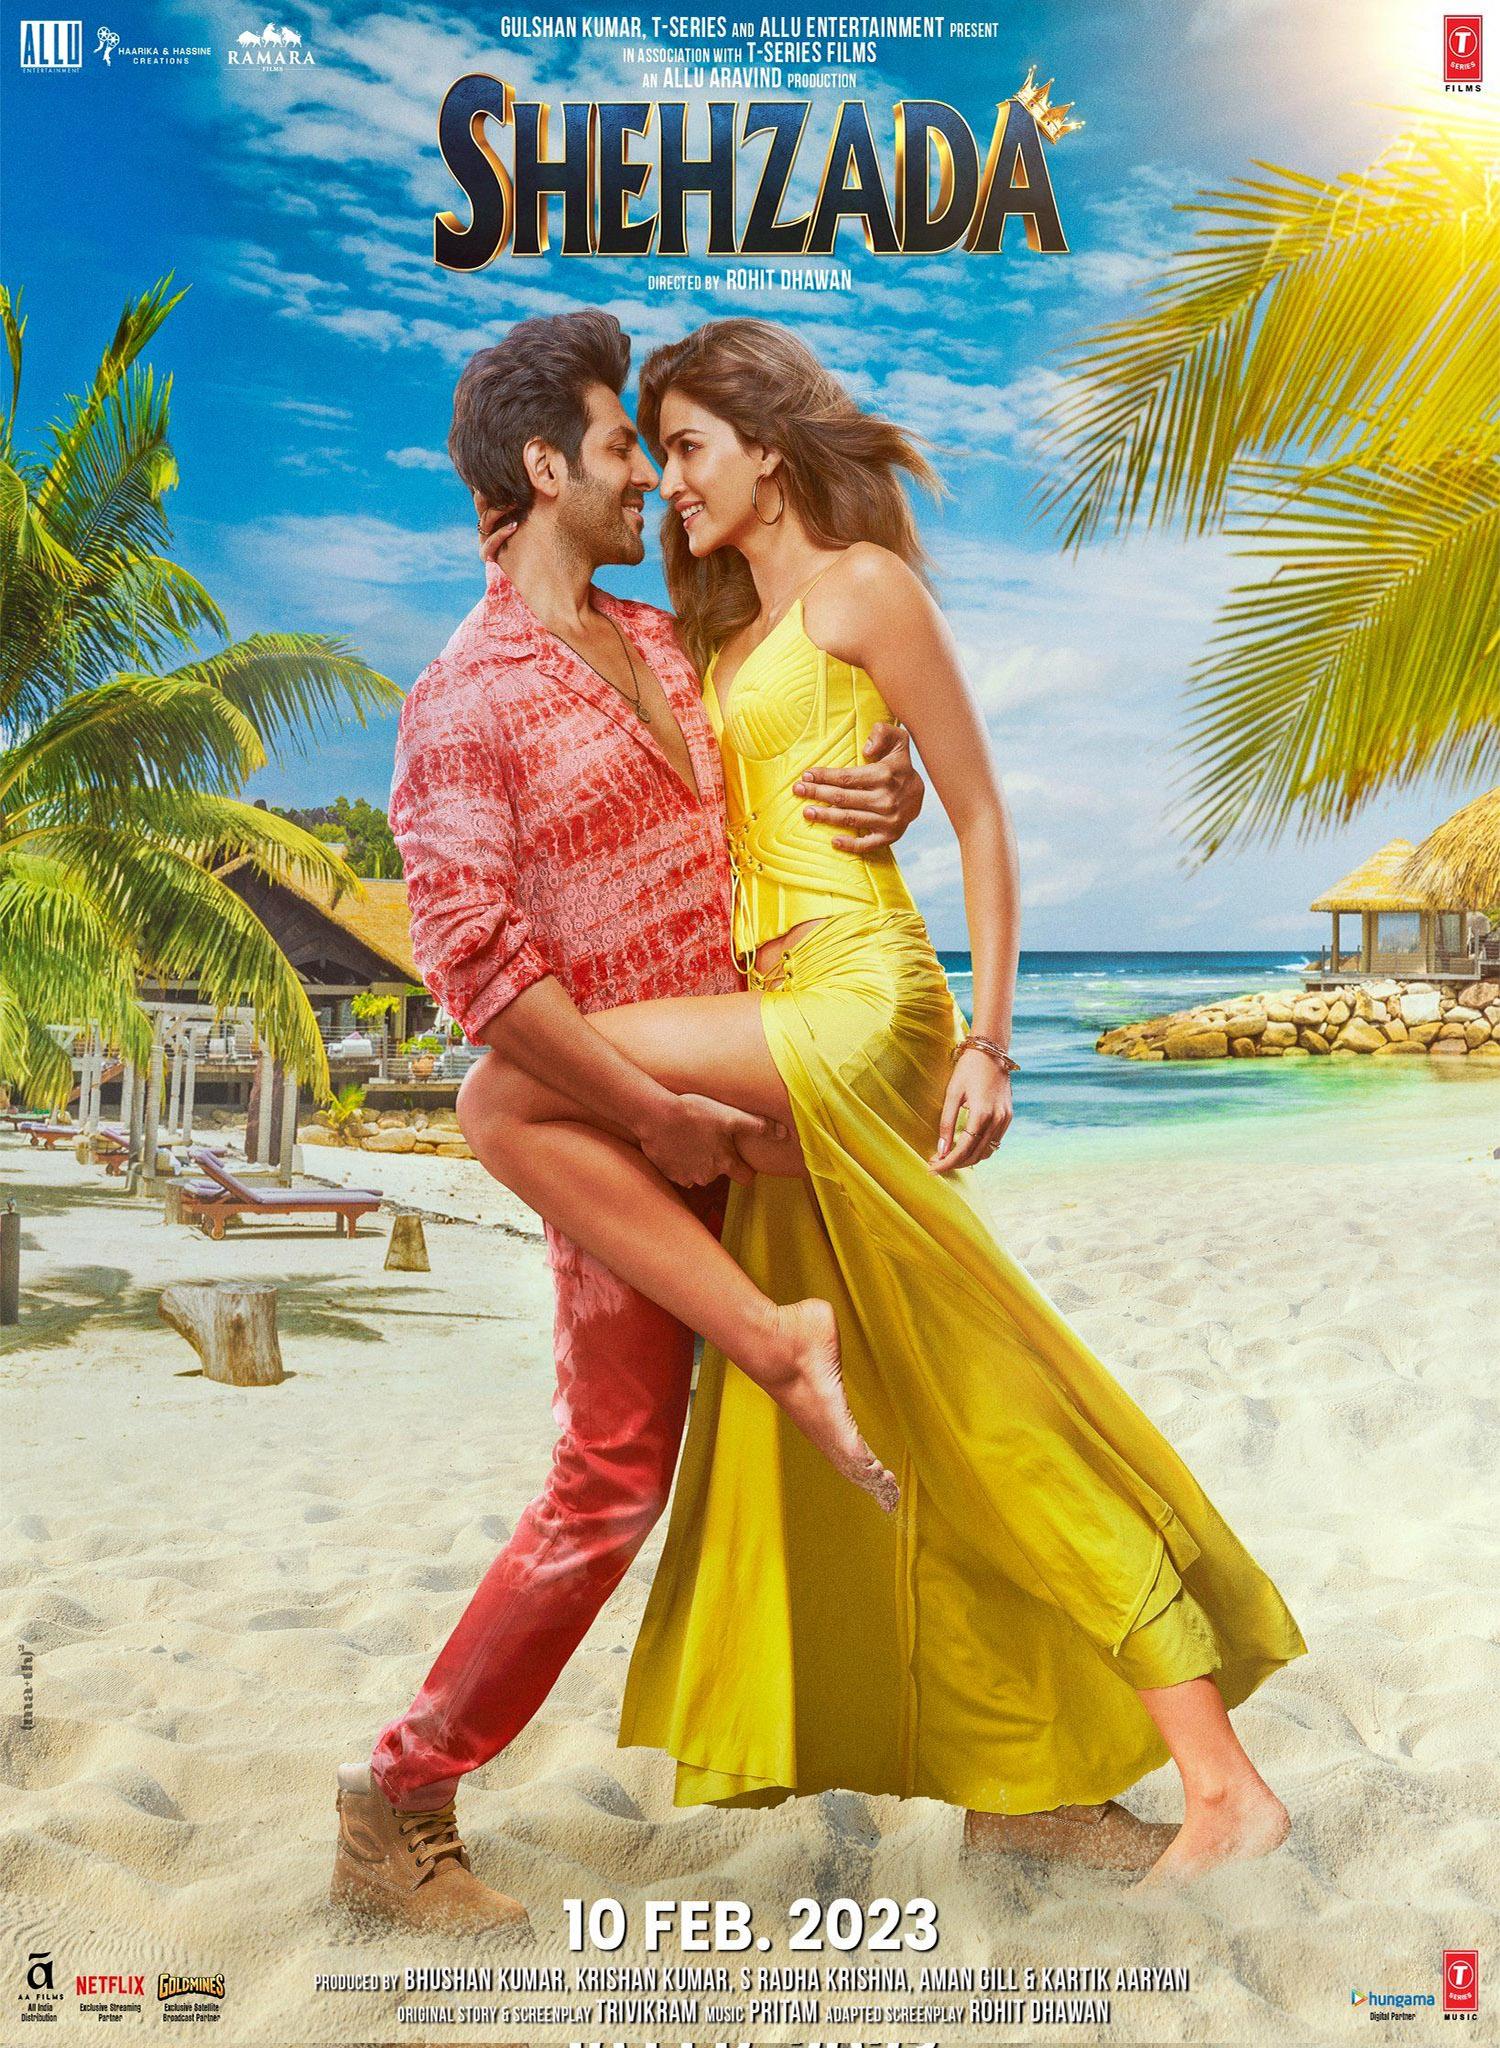 Shehzada (2023) features Kriti Sanon and Kartik Aaryan in an action-packed narrative of love and redemption, directed by Rohit Dhawan. It promises an exhilarating journey of self-discovery and triumph against all odds.